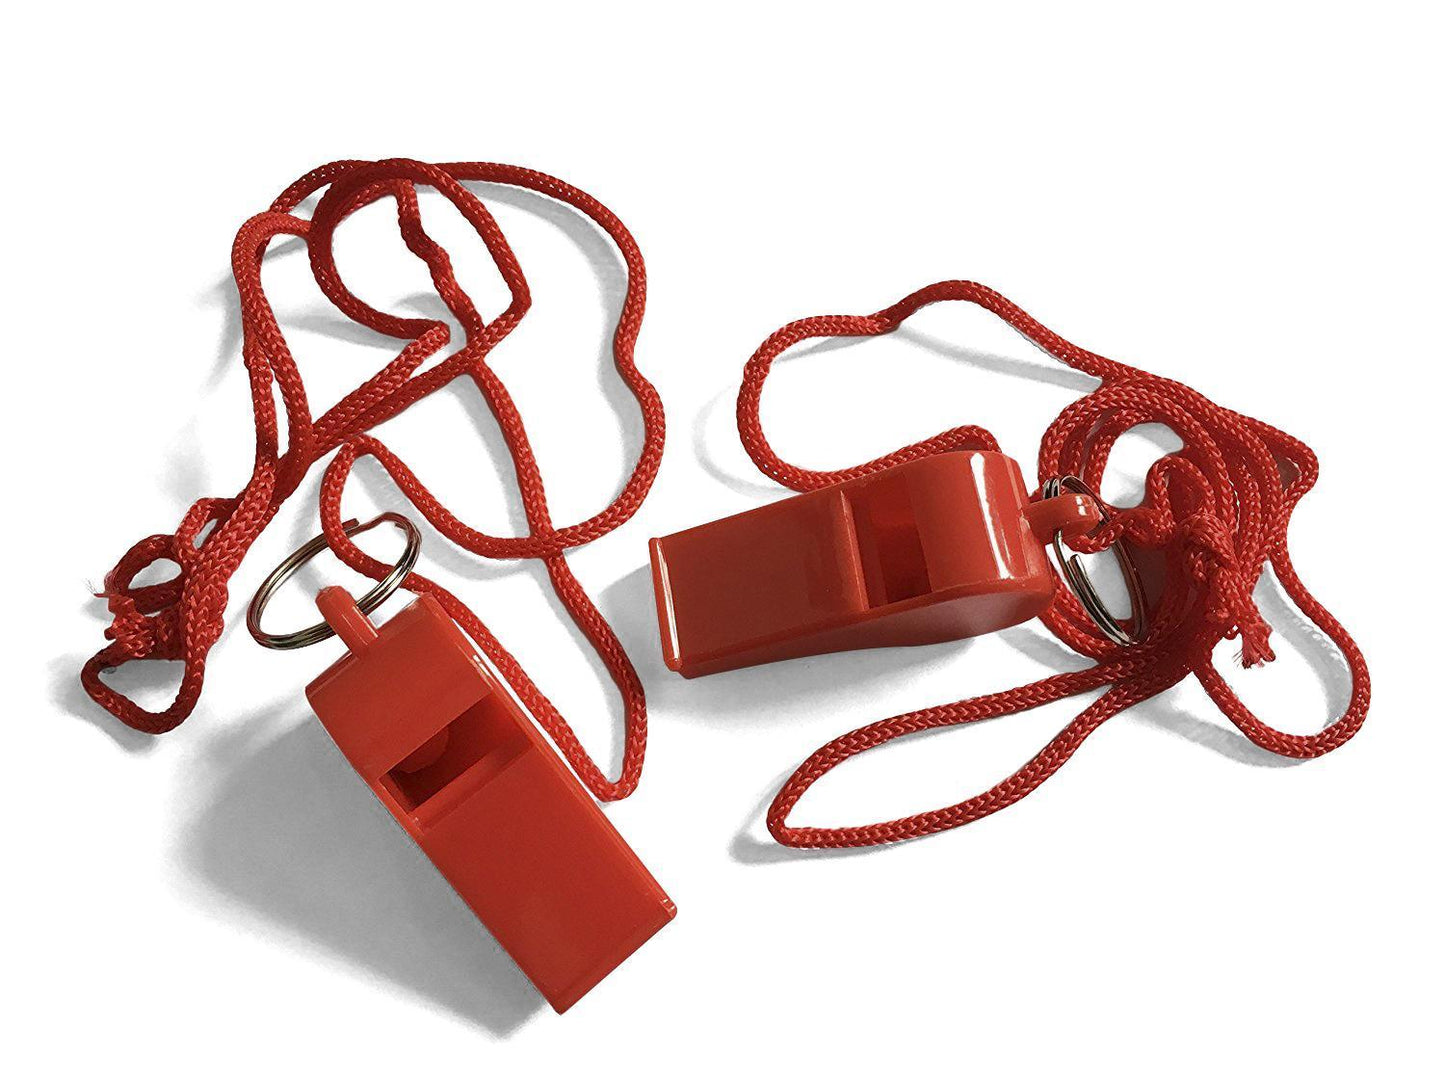 Bag of 100 Red Plastic Whistles with Lanyard Neck Cord